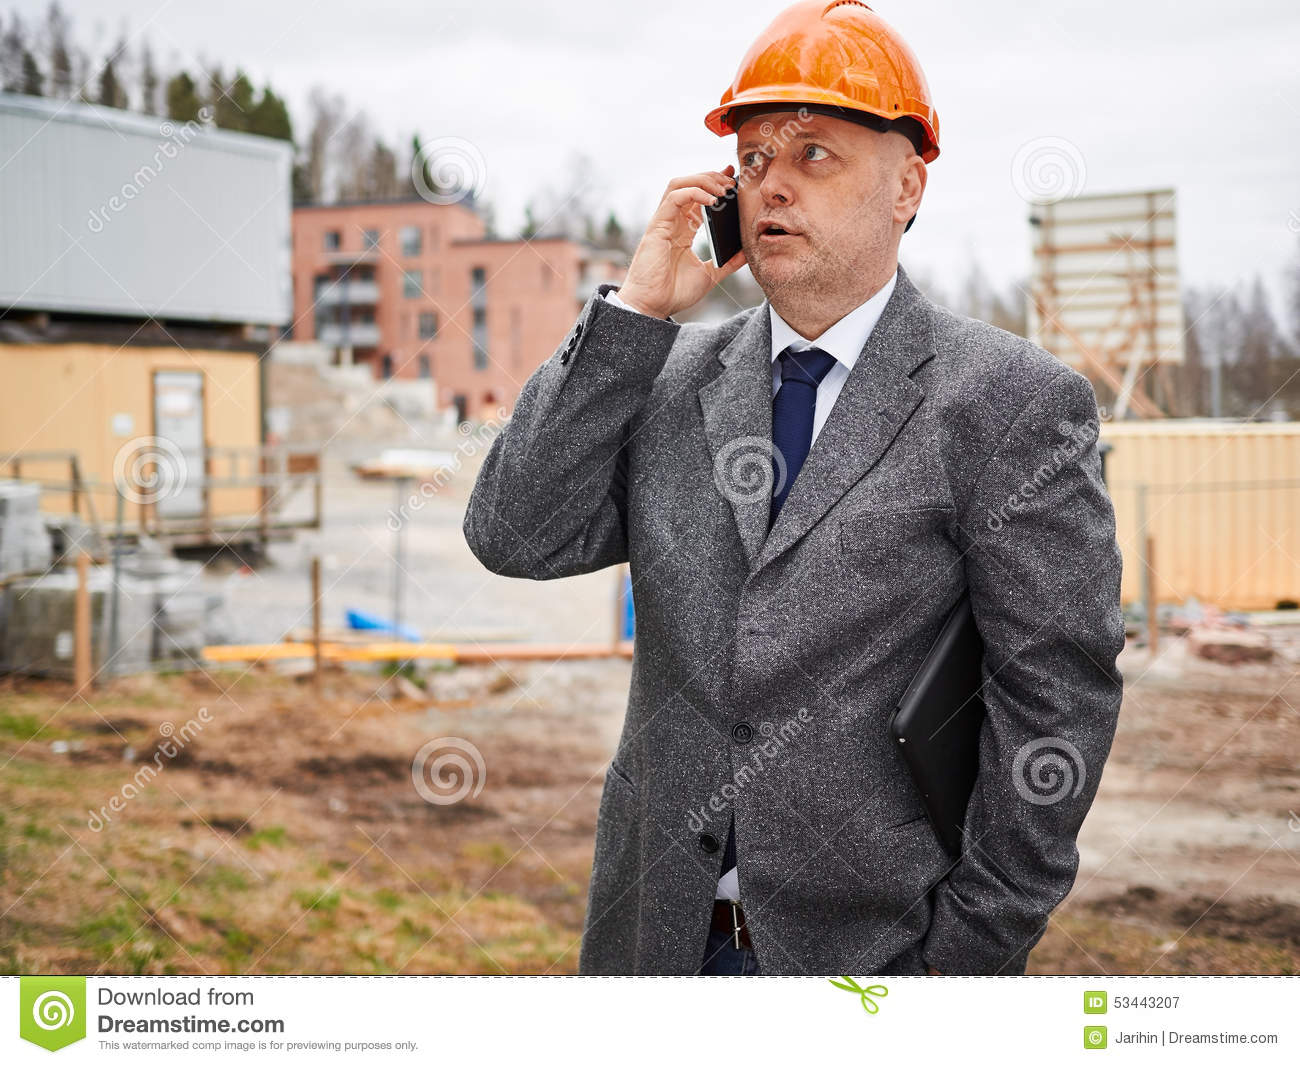 Male Engineer Uses Cell Phone He Wearing The Suit And The Hard Hat    